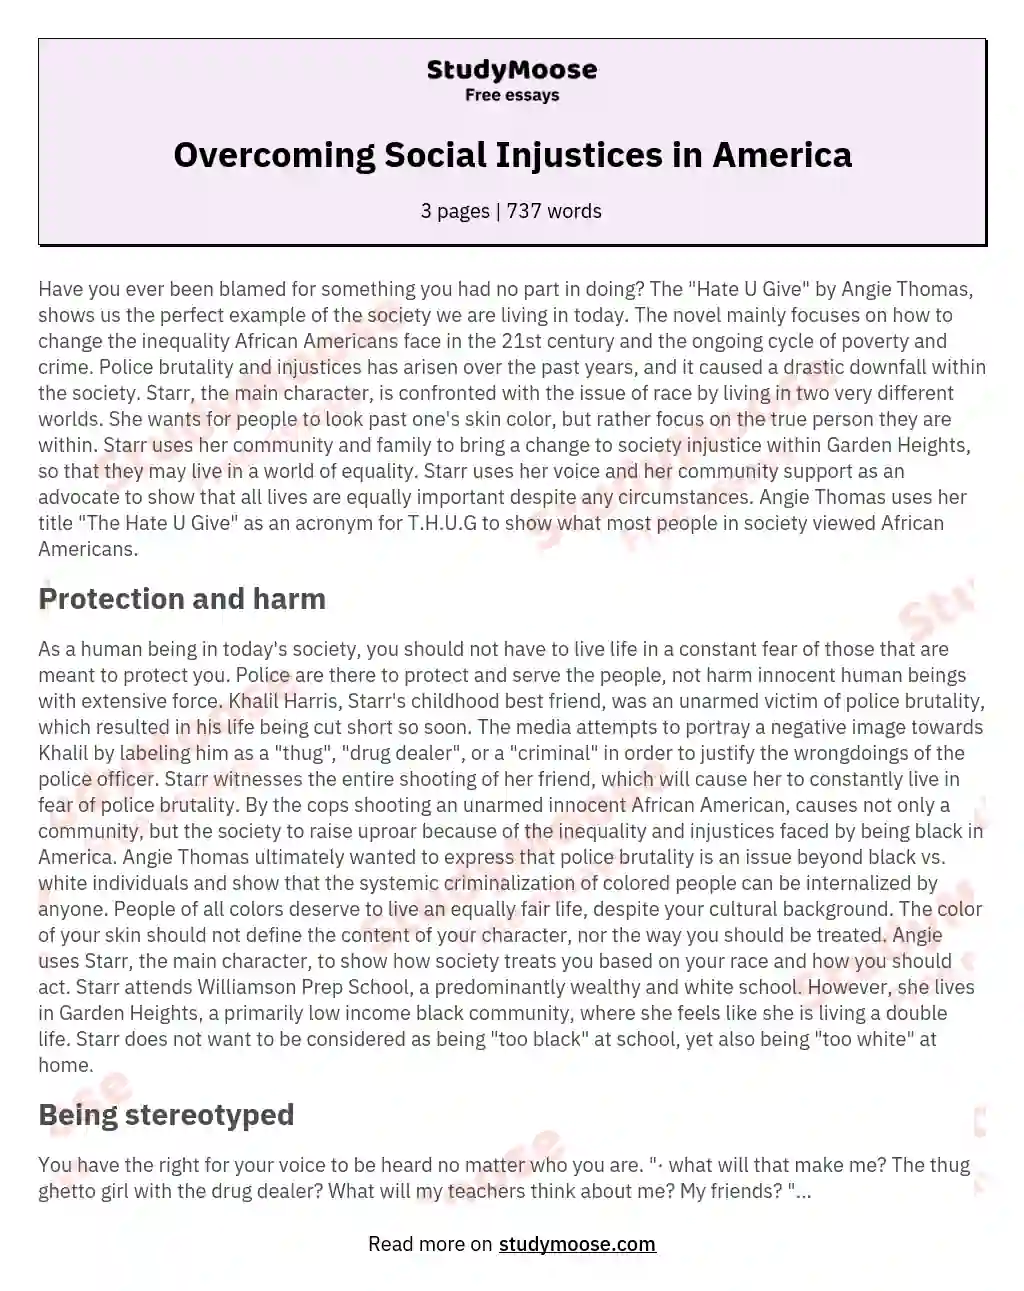 Overcoming Social Injustices in America essay